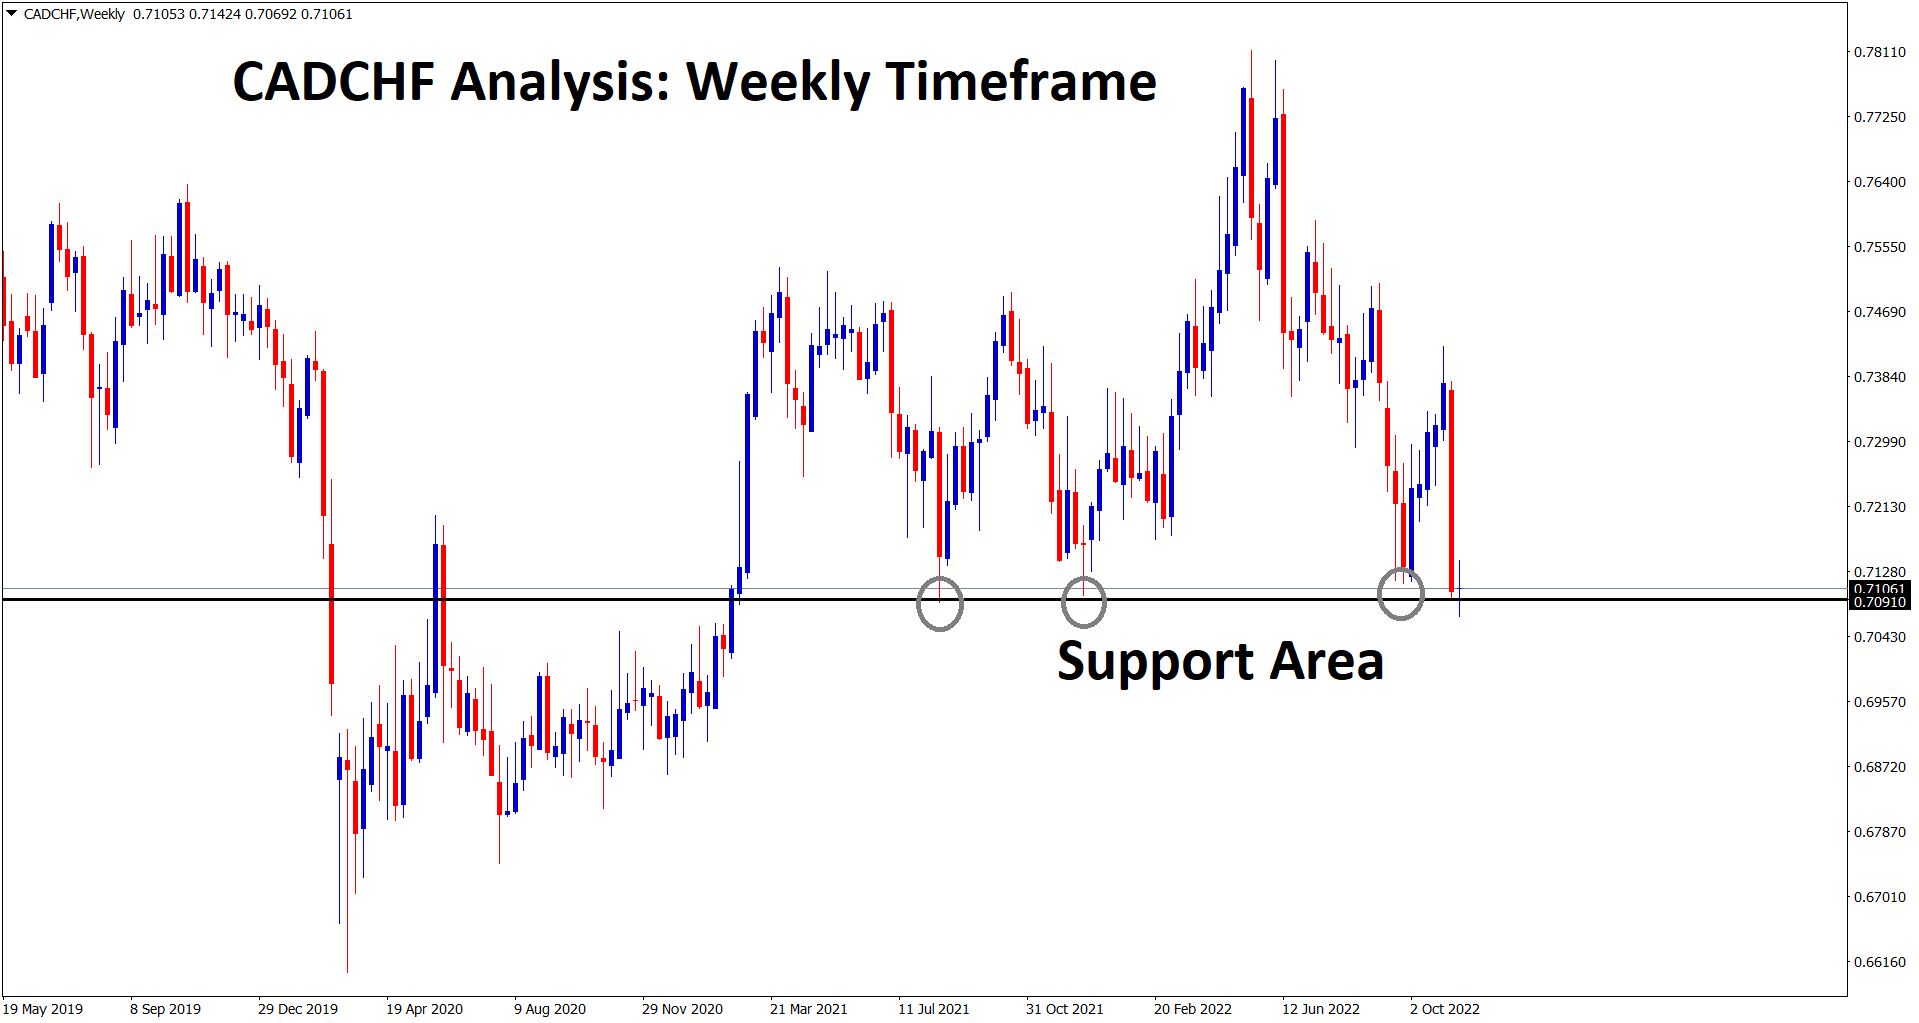 CADCHF is standing at the weekly support area